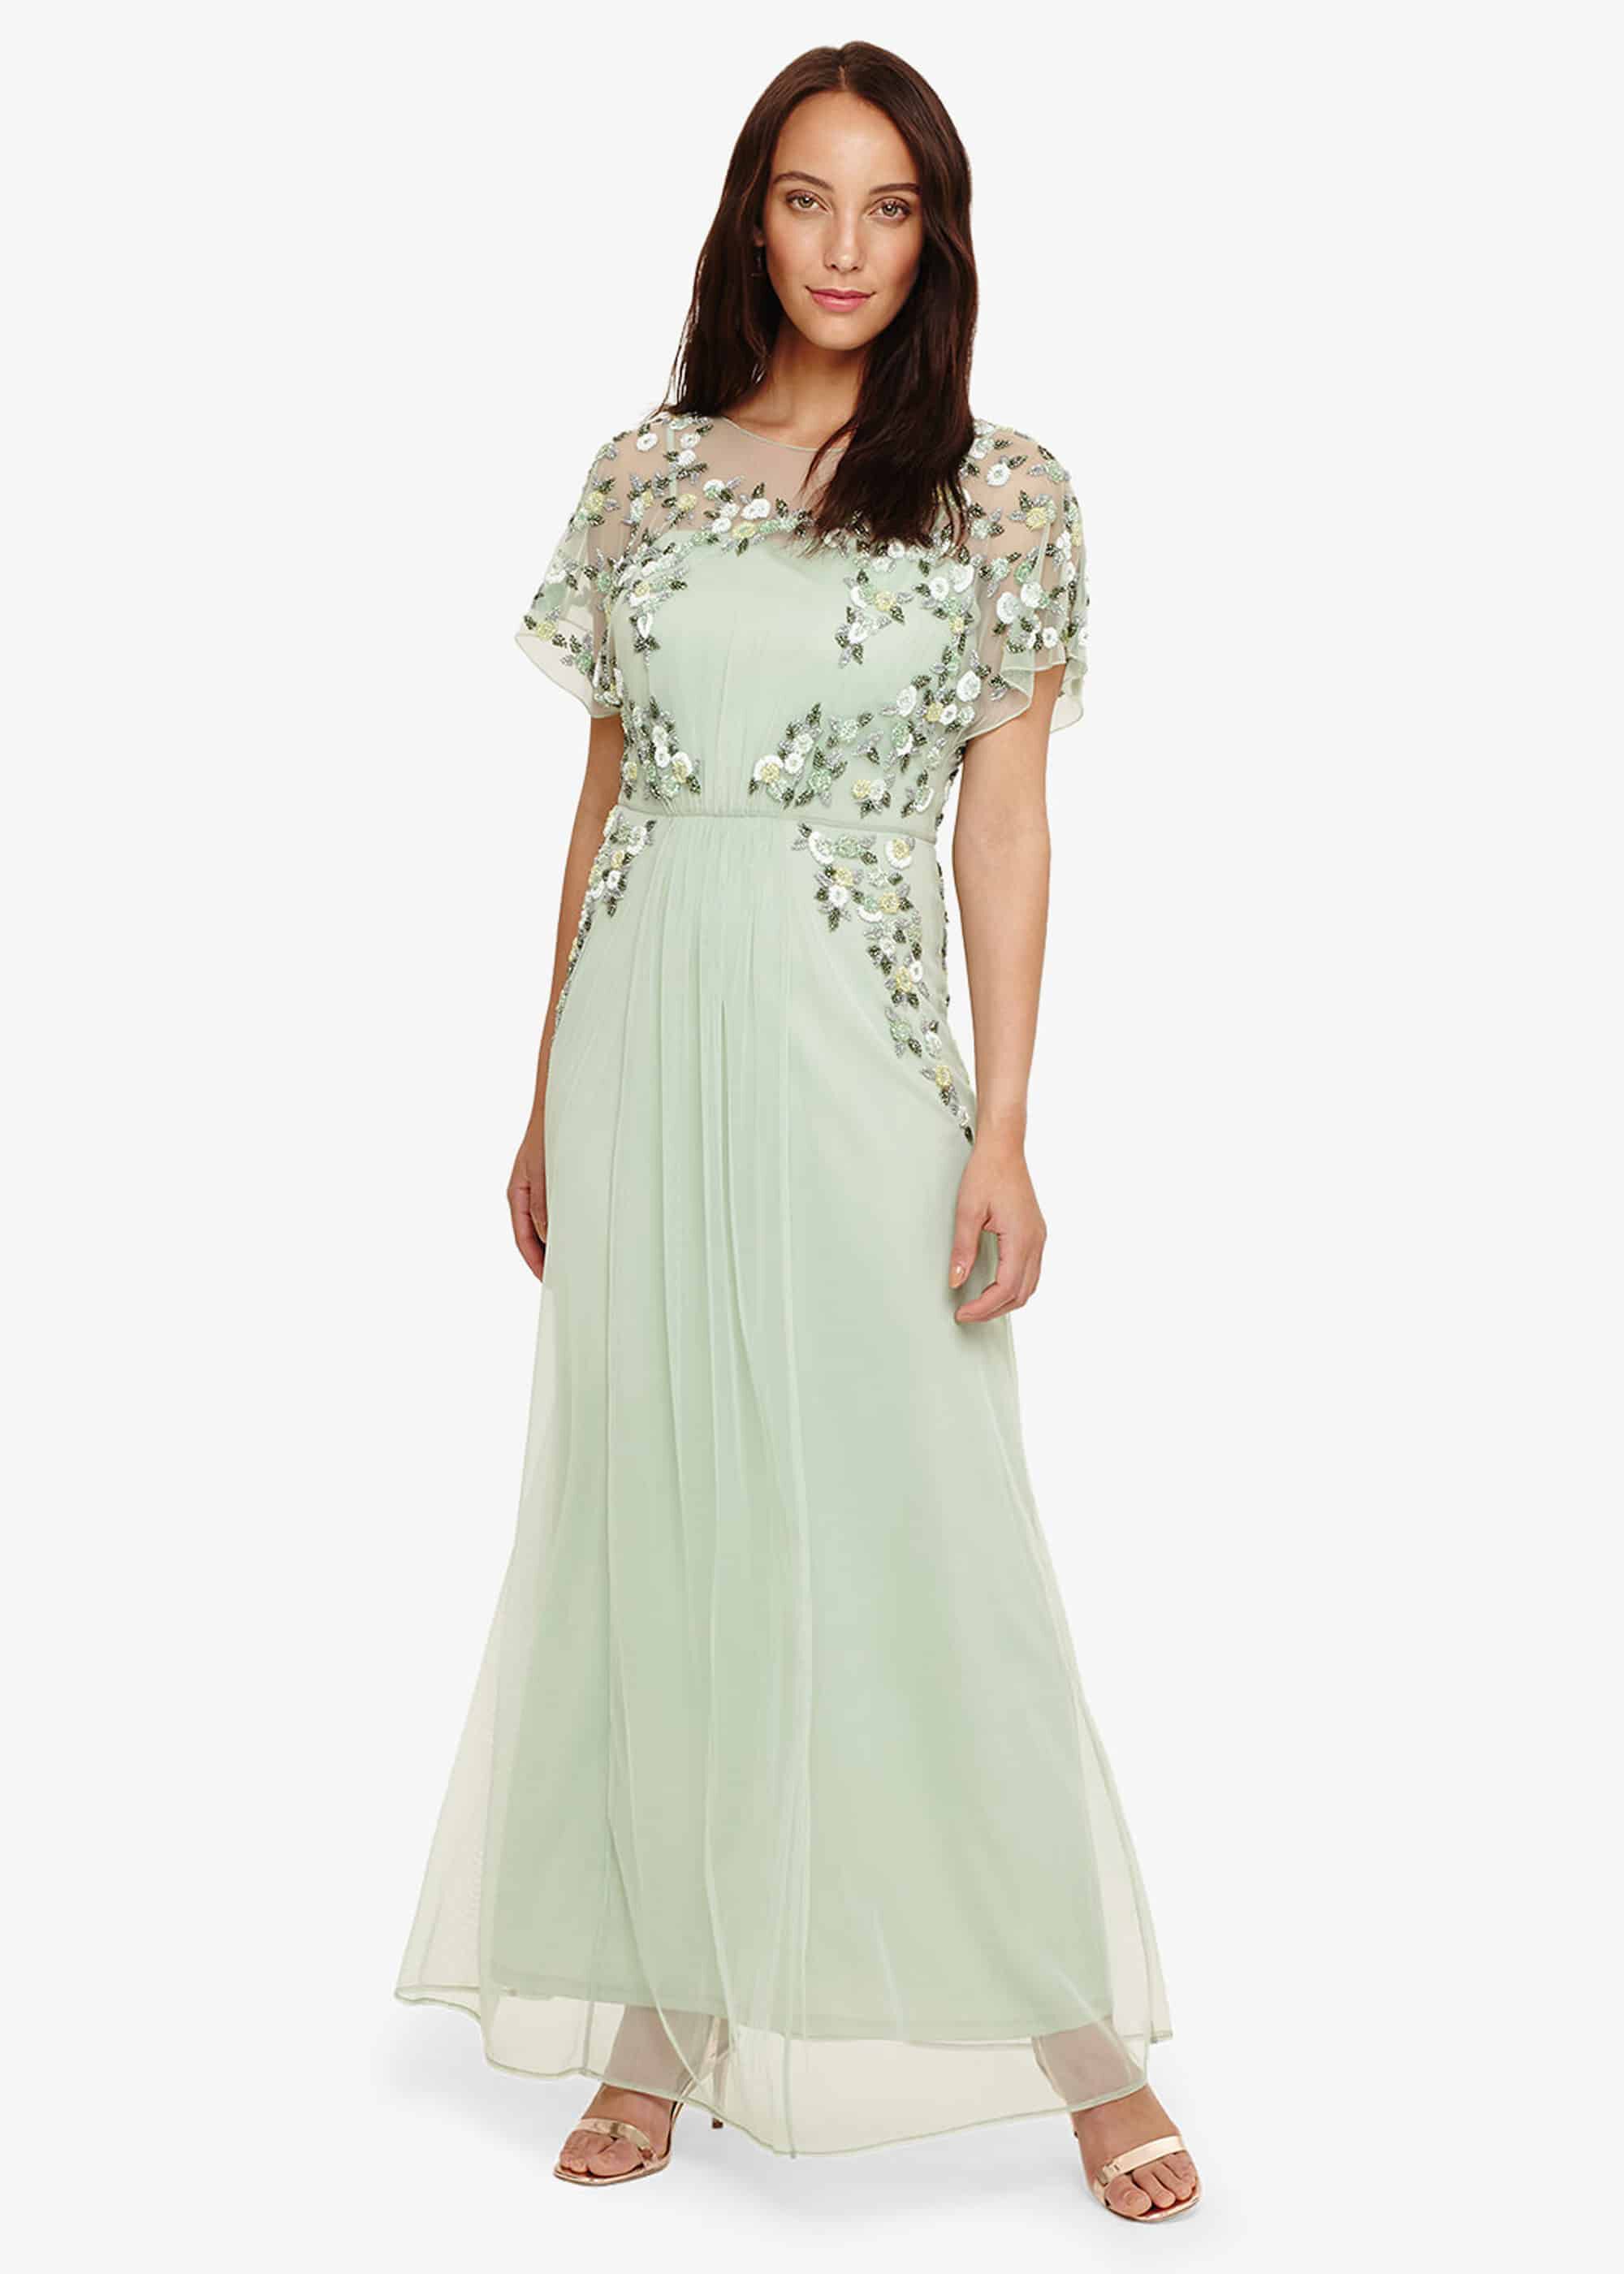 Phase Eight Dresses Deals, 56% OFF ...